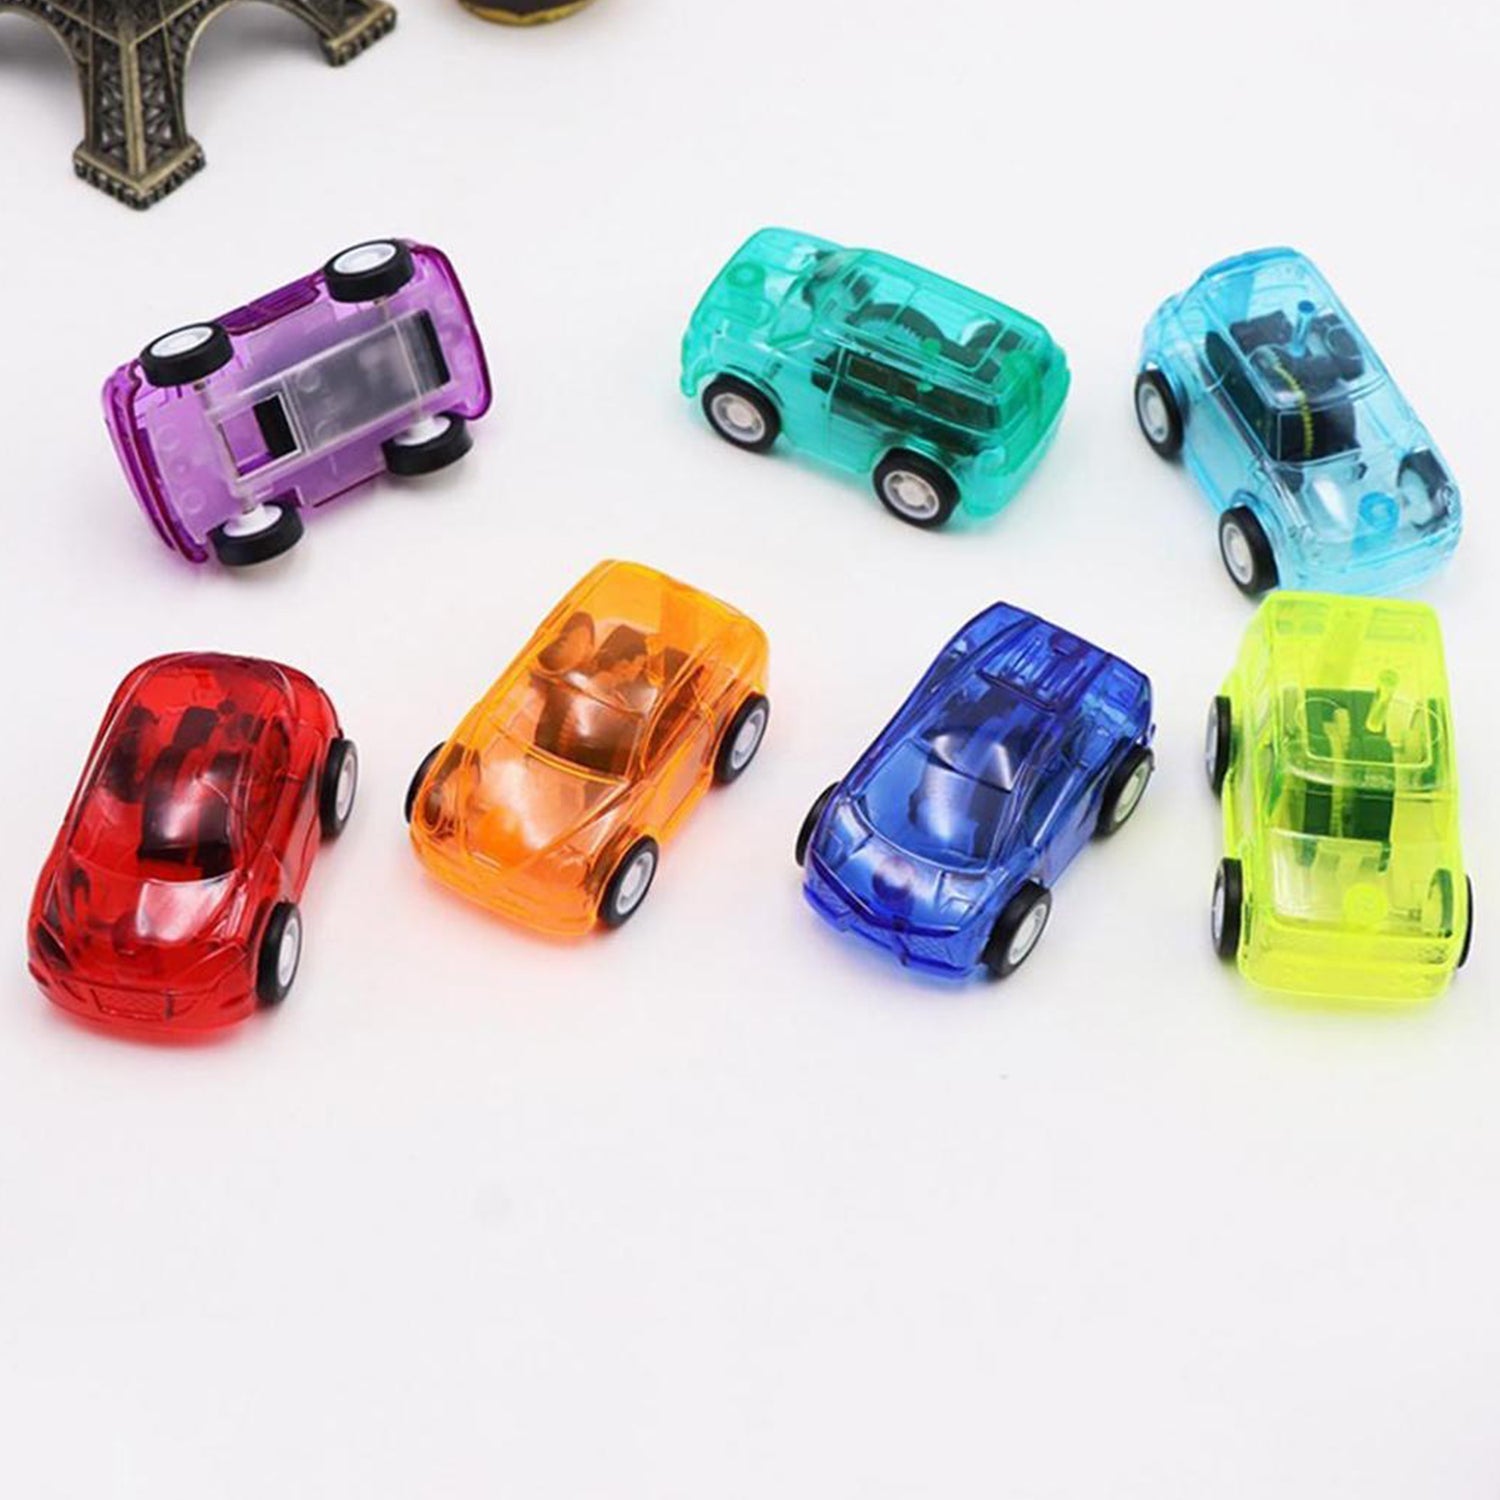 8074 Mini Pull Back Car used widely by kids and children’s for playing and enjoying purposes in all kinds of household and official places.